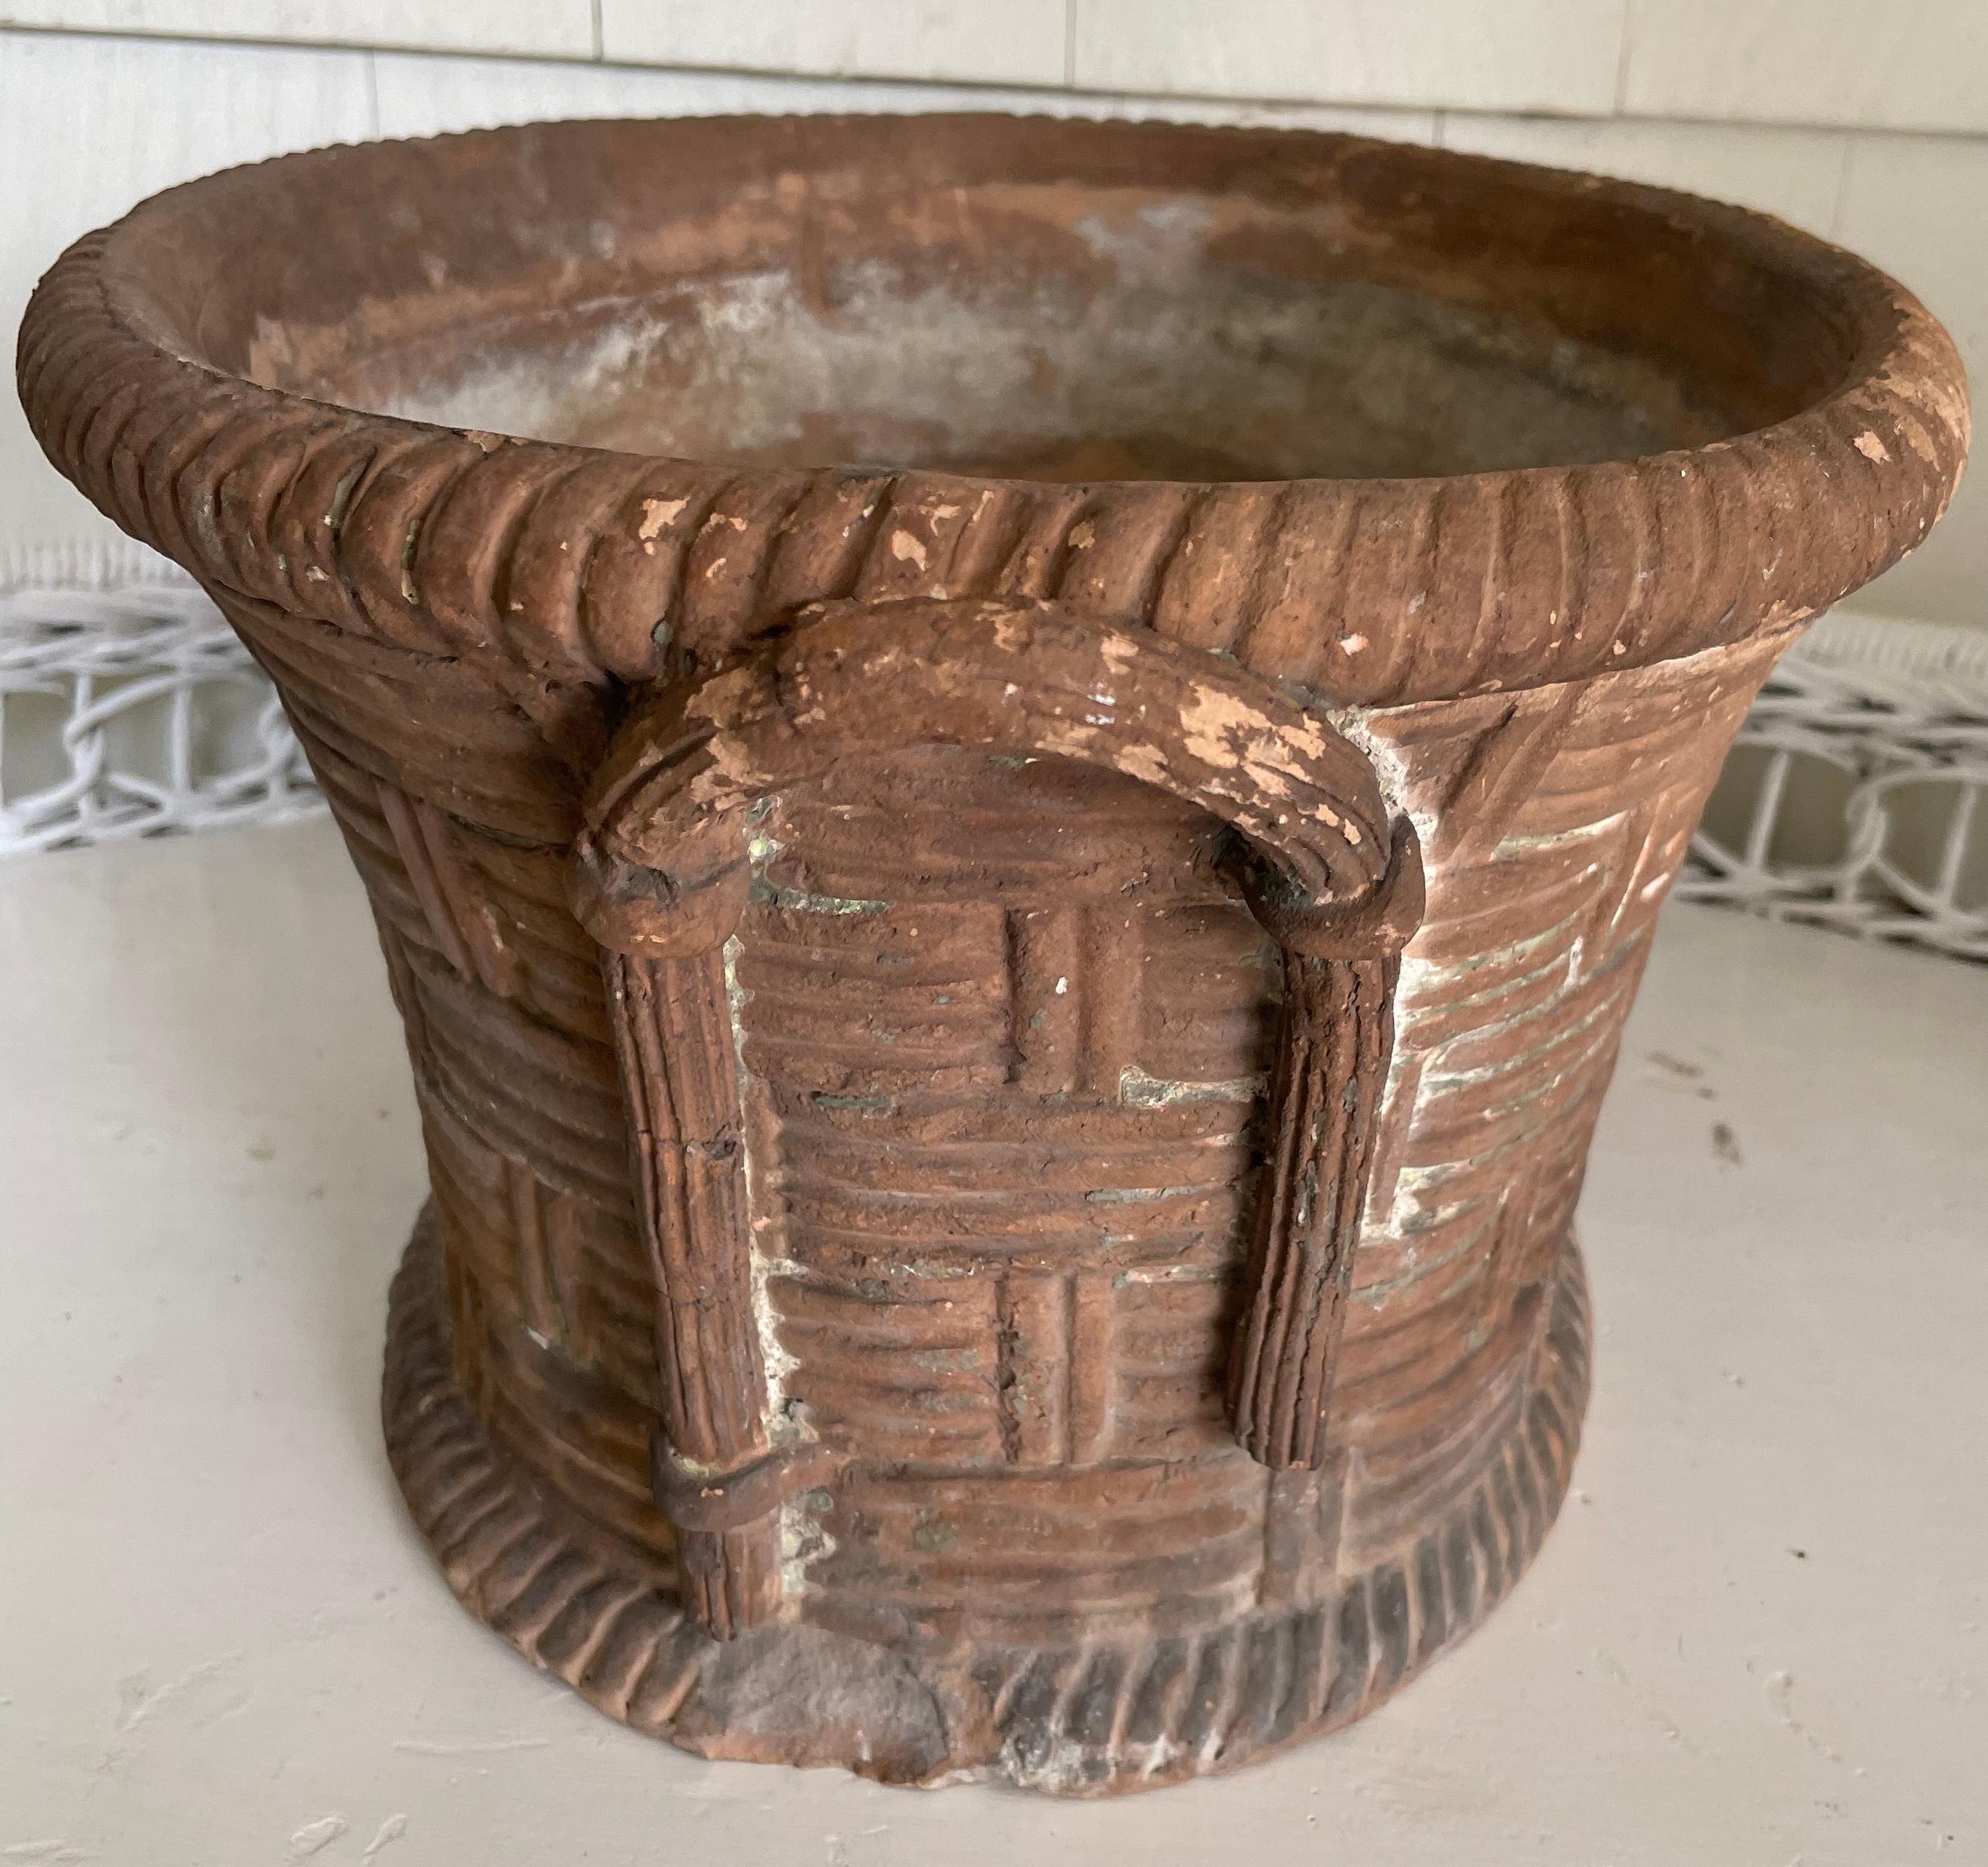 Italian basket weave terracotta planter.   Neoclassical period antique cachepot planter beautifully rendered in terracotta with realistic branch handles; Naples, of the period. Italy, early 1800’s. Dimensions: 15.5